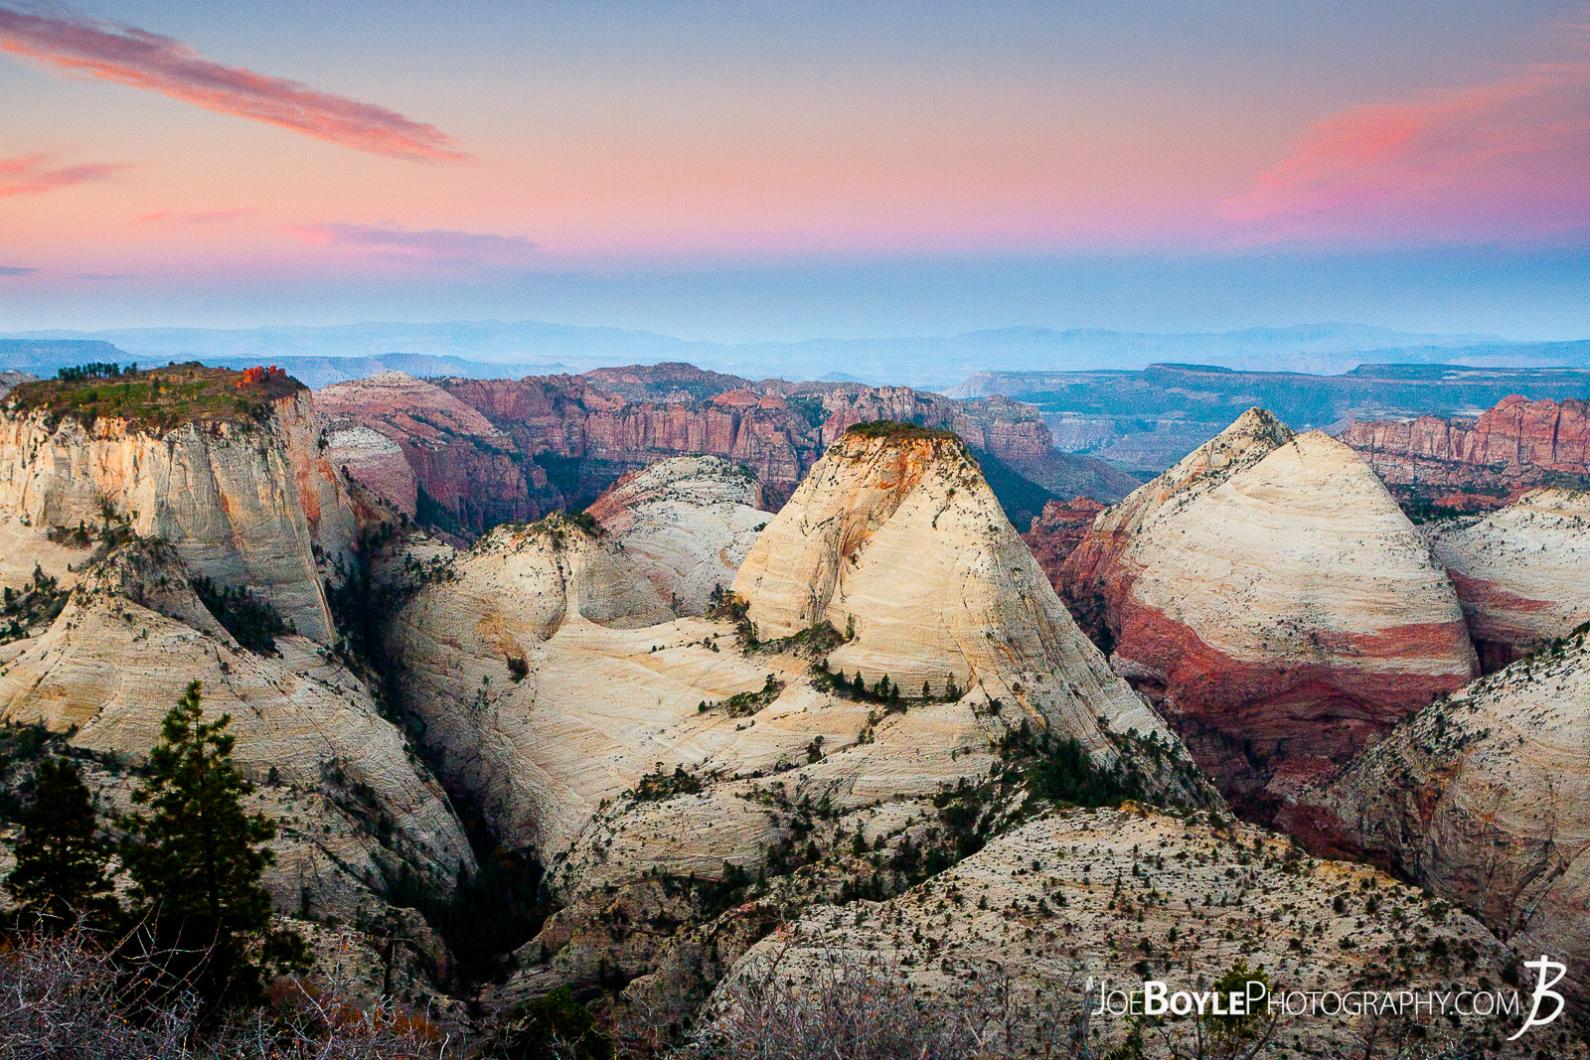 canyons-mountain-peaks-and-valleys-during-a-sunrise-in-zion-national-park